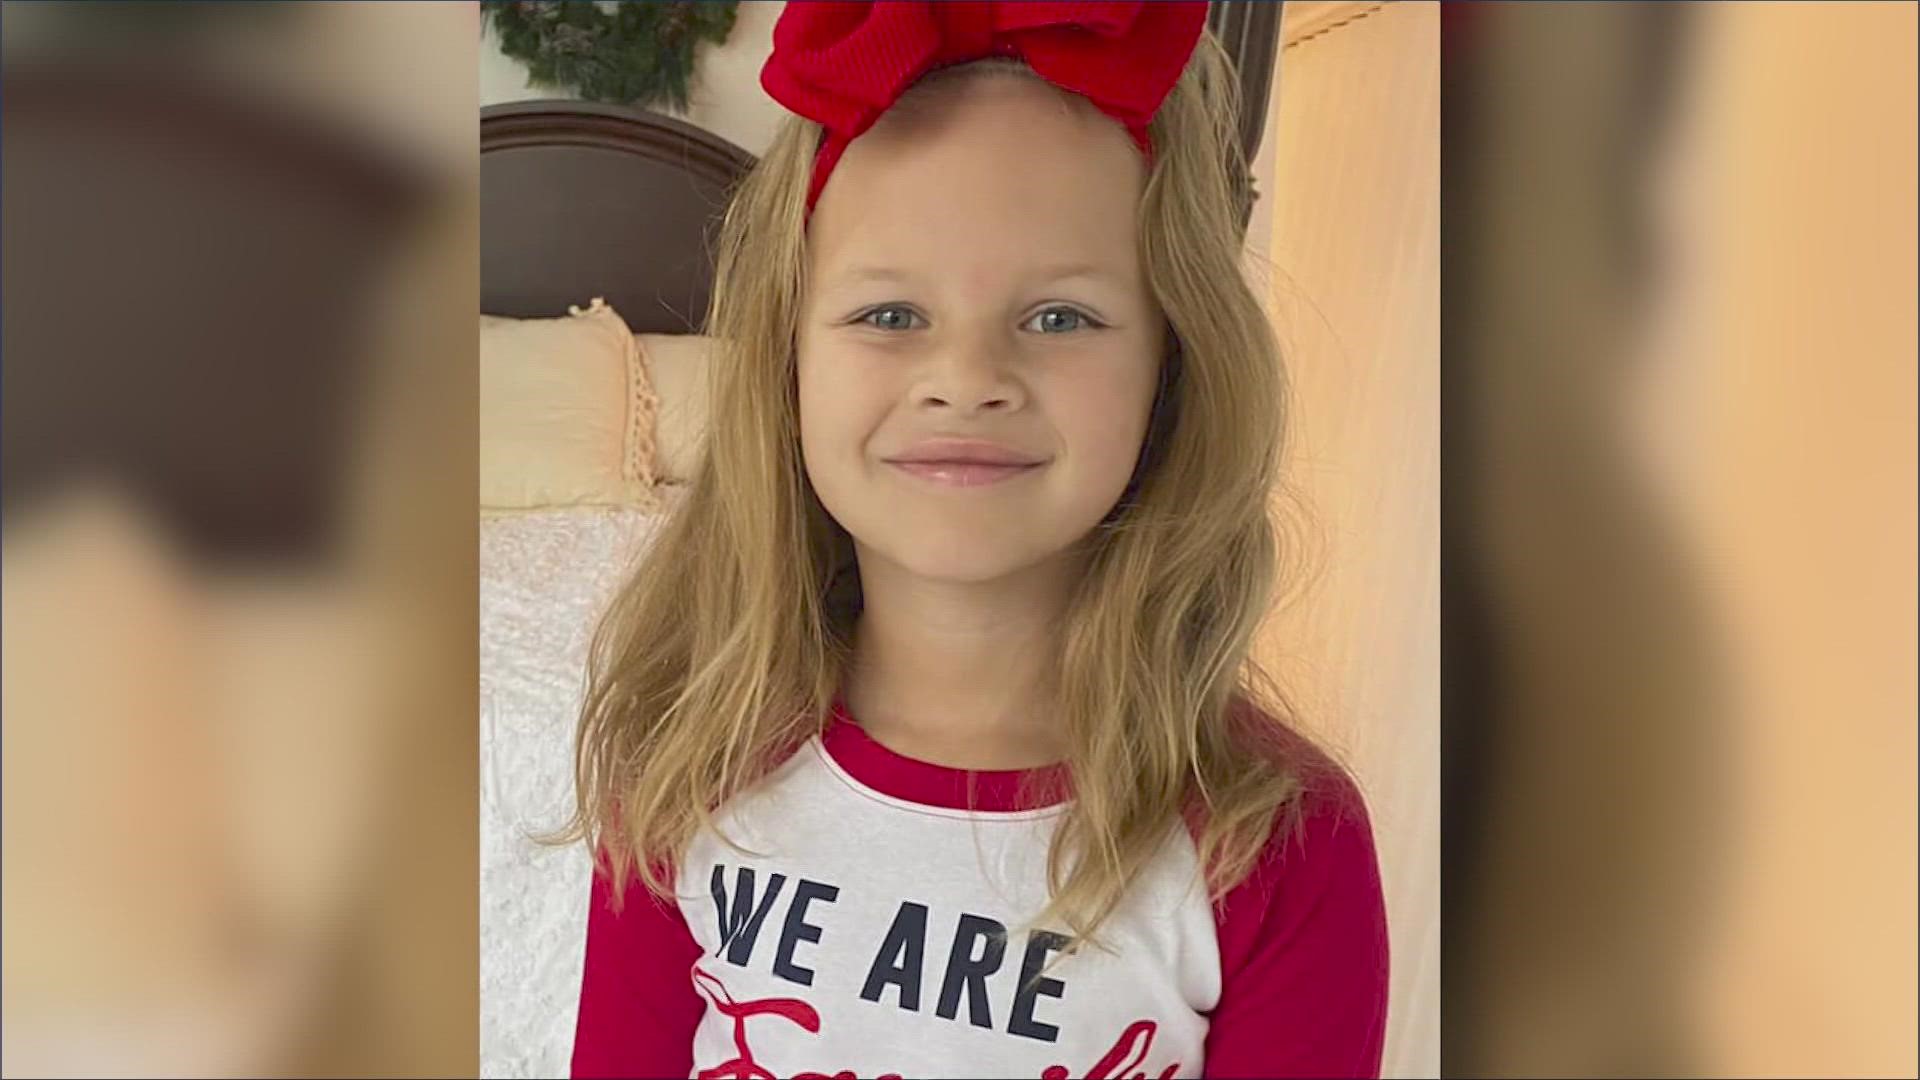 Athena Strand, 7, is the the subject of an AMBER Alert after she disappeared Wednesday, Nov. 30.